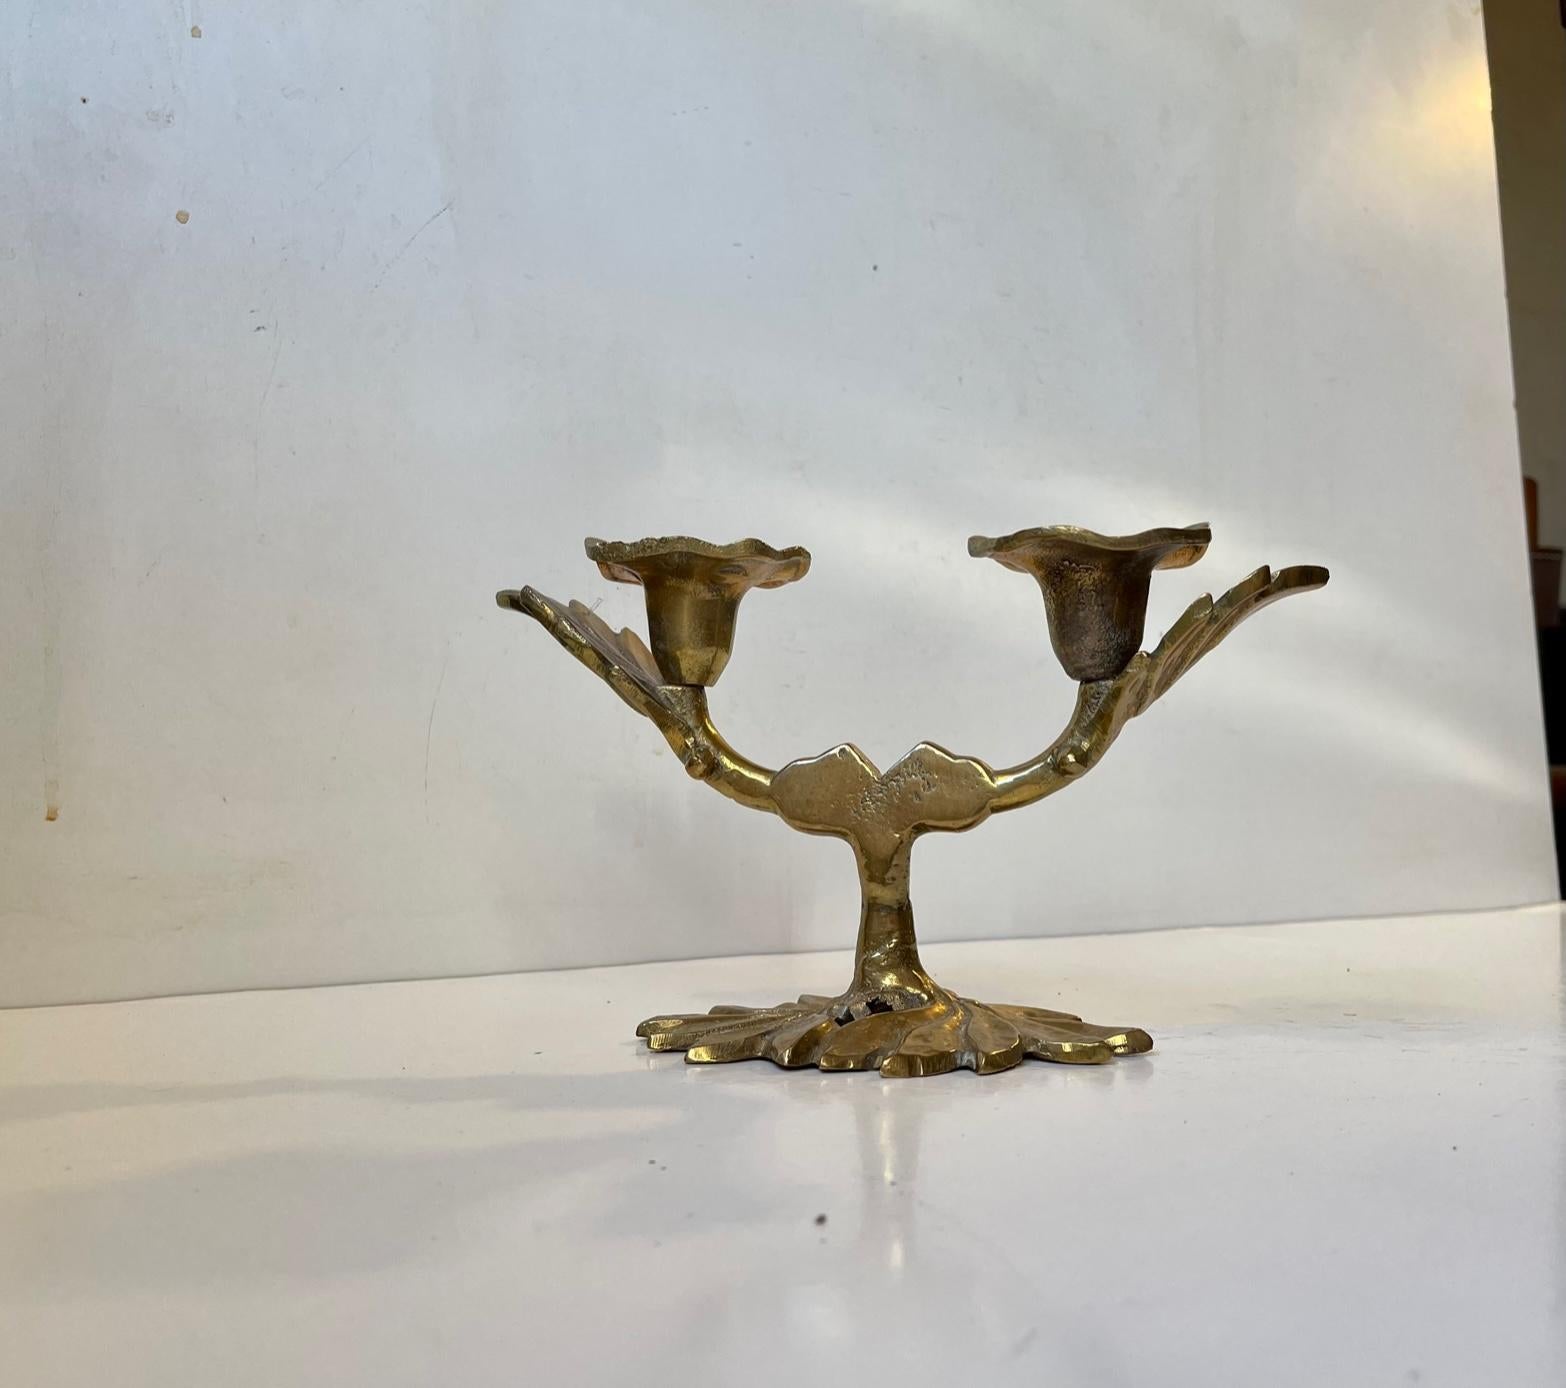 Naturalistically shaped candleholder in solid brass. Cast with leaf details to the base and both sides/arms. Made in Italy circa 1970-80. Measurements: W: 20 cm, H: 12 cm.